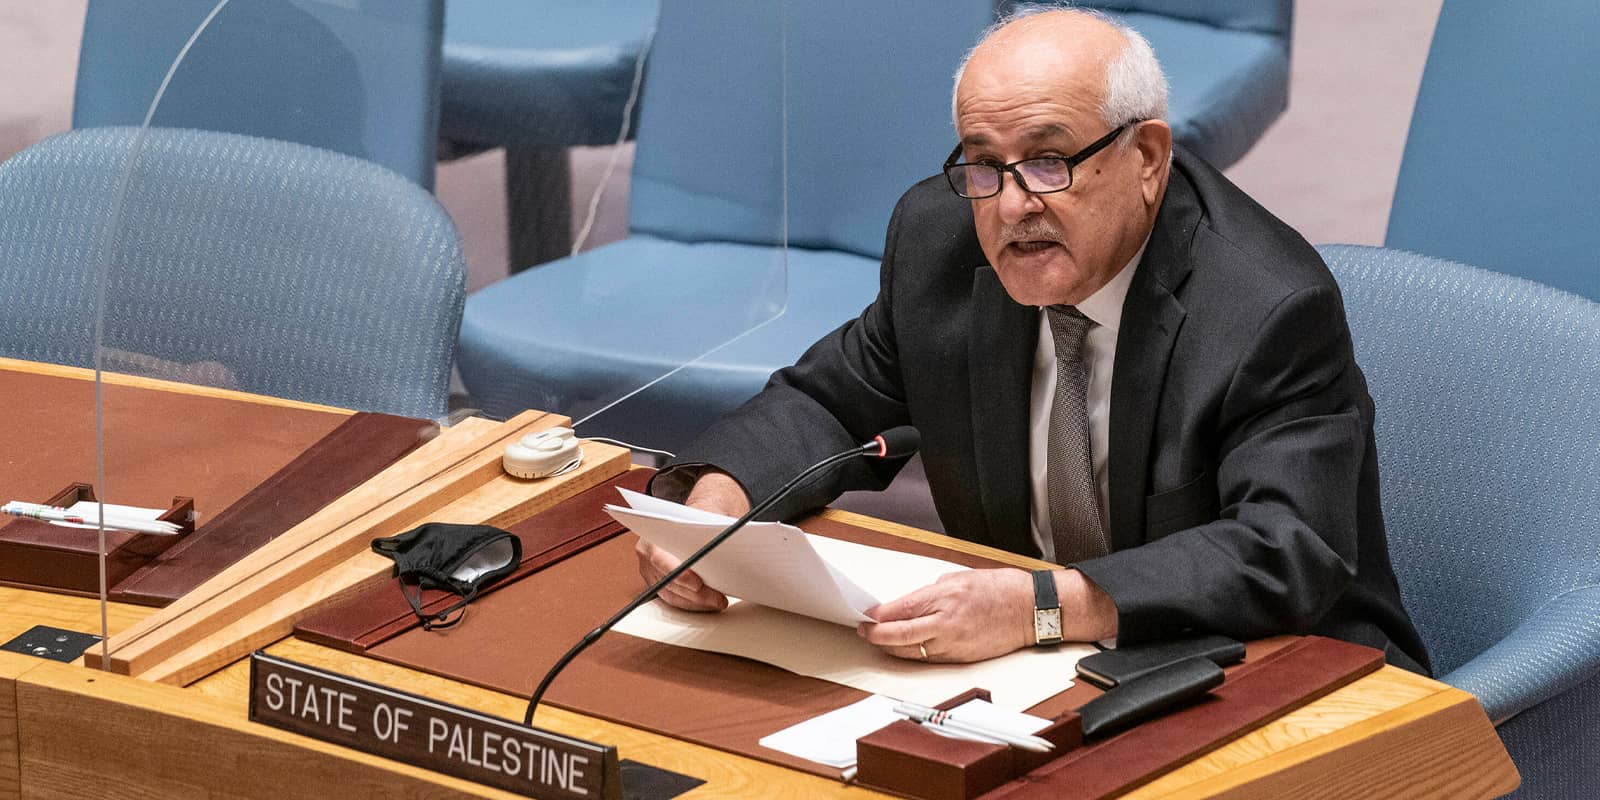 Security Council open discussion of the situation in the Middle East Permanent Representative of State of Palestine Riyad Mansour speaks during discussion of the situation in the Middle East including the Palestinian question at UN Headquarters.